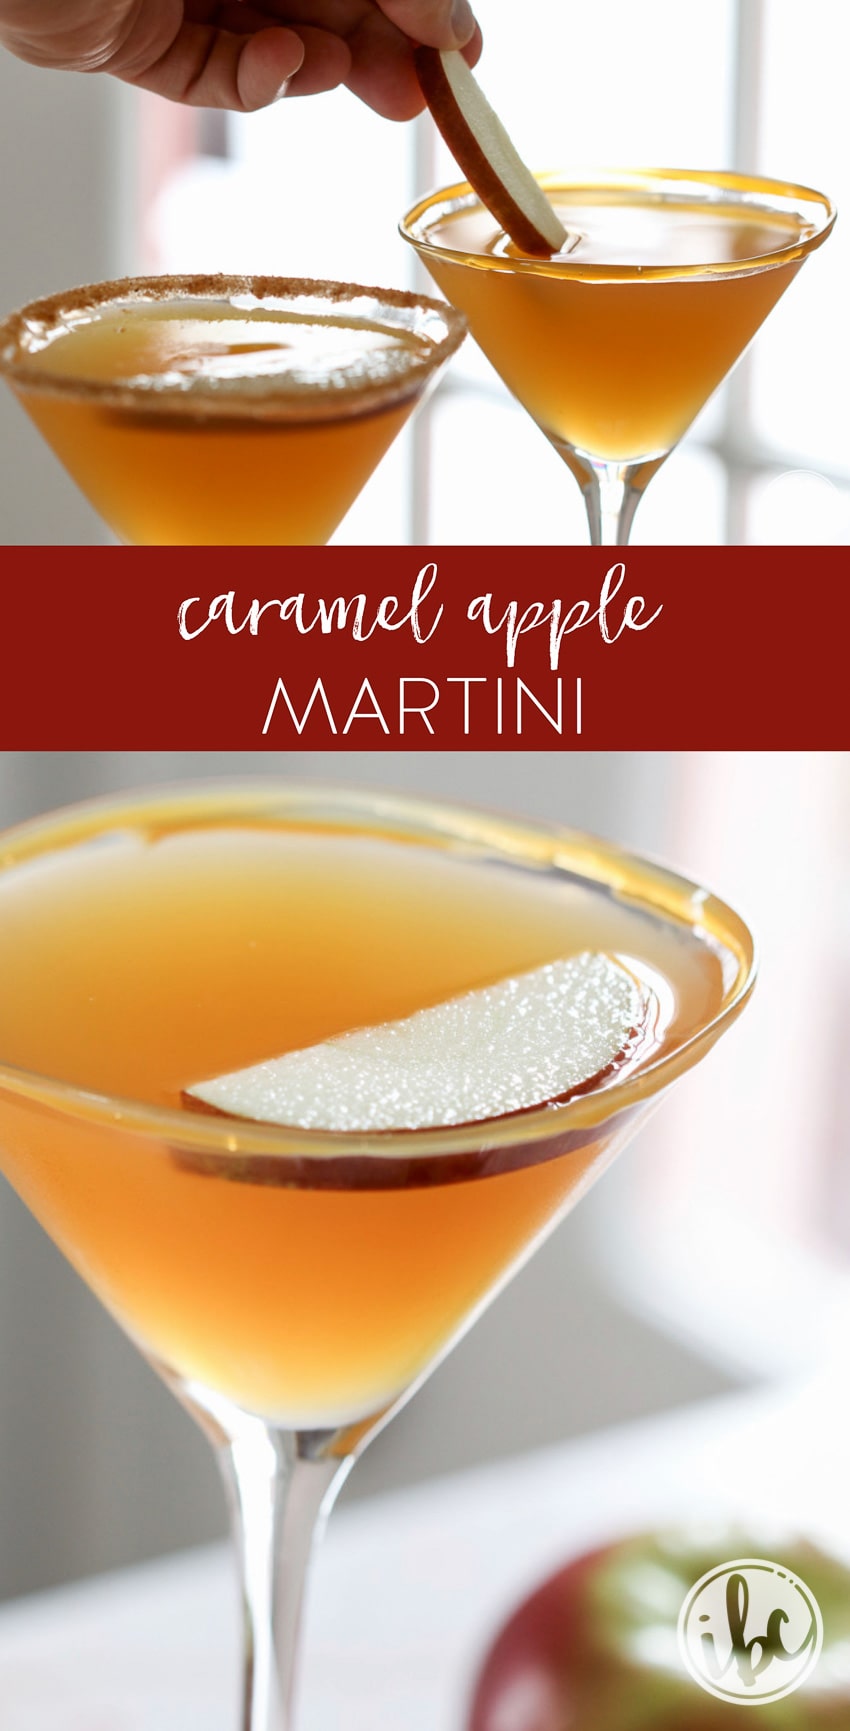 This Caramel Apple Martini is an easy and delicious fall cocktail recipe. #fall #cocktail #martini #applemartini #caramel #recipe